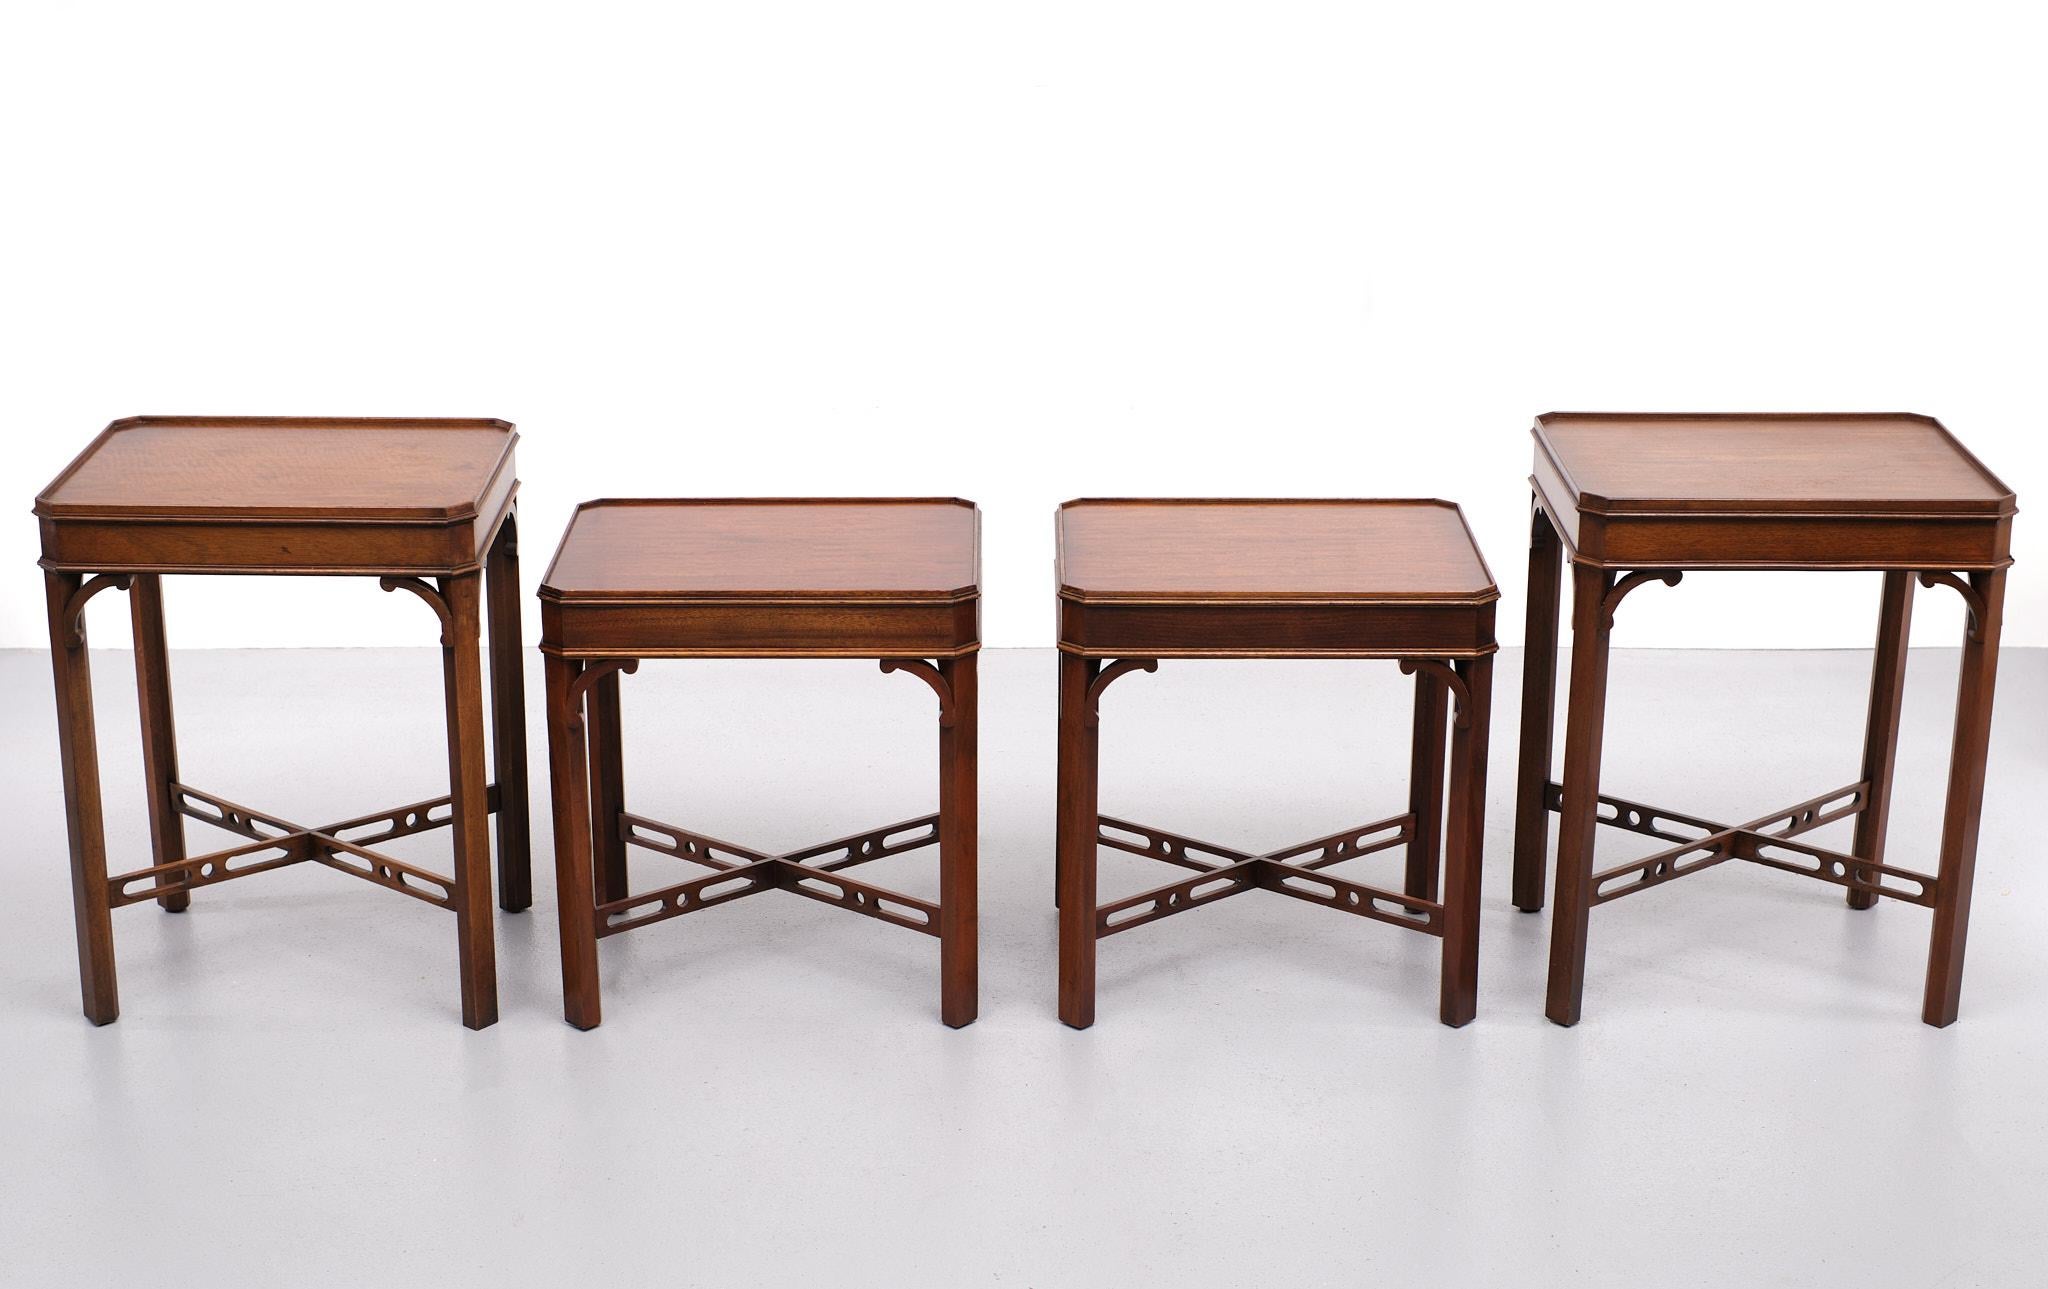 Good quality Bevan Funnell .Georgian revival side tables.
Having pierced cross legs. Beautiful set with slightly raised edges. Beautiful handmade side tables. Very nice warm color. Marked with labels at the bottom.
Four pieces available, two